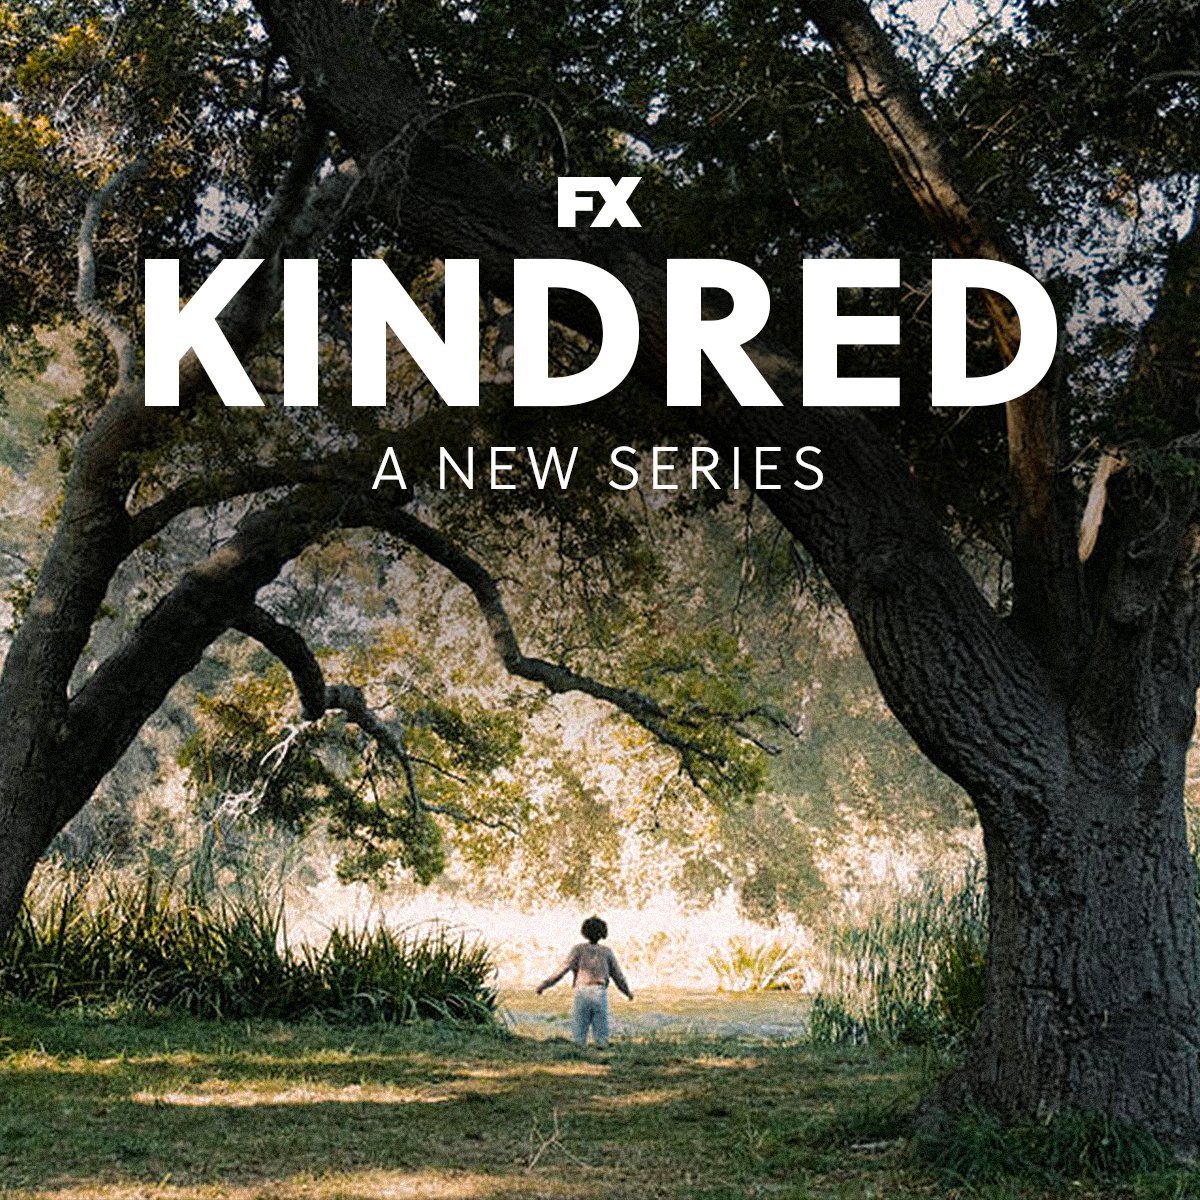 Based on the genre-bending novel by Octavia E. Butler, Kindred follows a young Black writer who finds herself ripped through time, shunted between modern-day Los Angeles and a nineteenth century plantation that holds her family's secrets. A new series coming to FX.